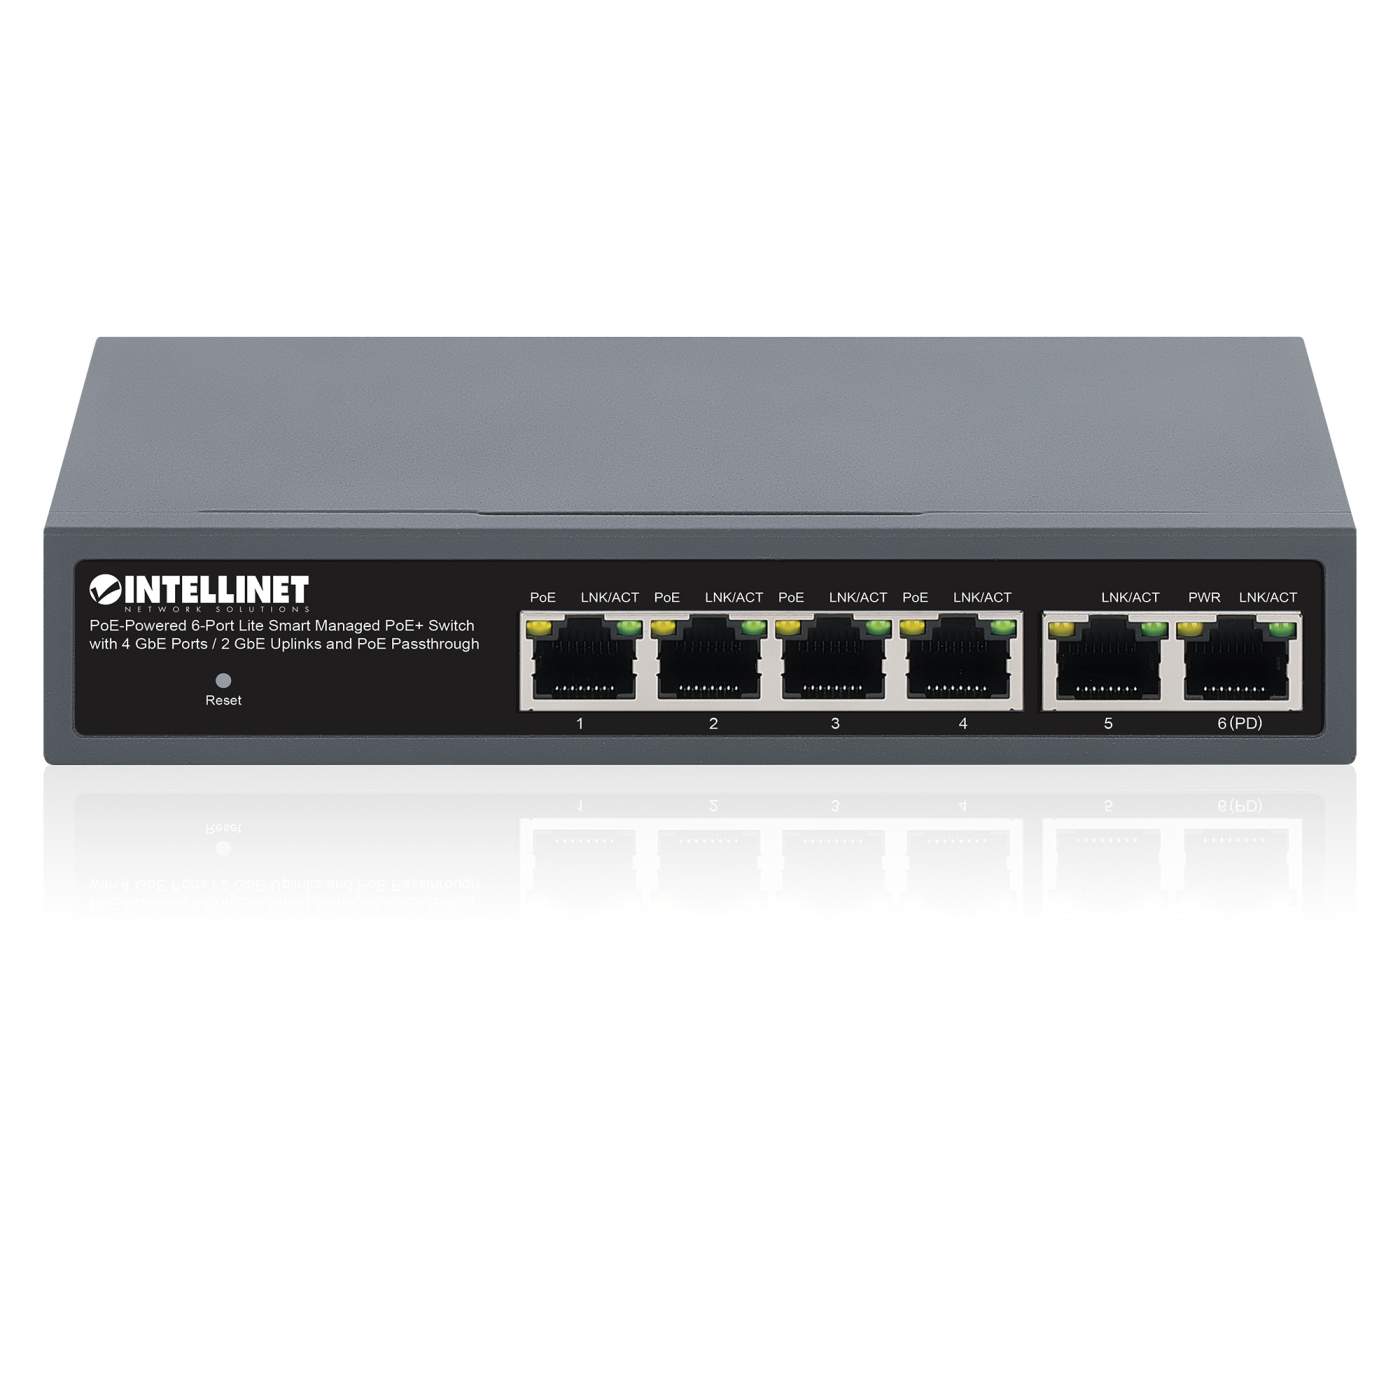 PoE-Powered 6-Port Lite Smart Managed PoE+ Switch with 4 GbE Ports / 2 GbE Uplinks and PoE Passthrough Image 5